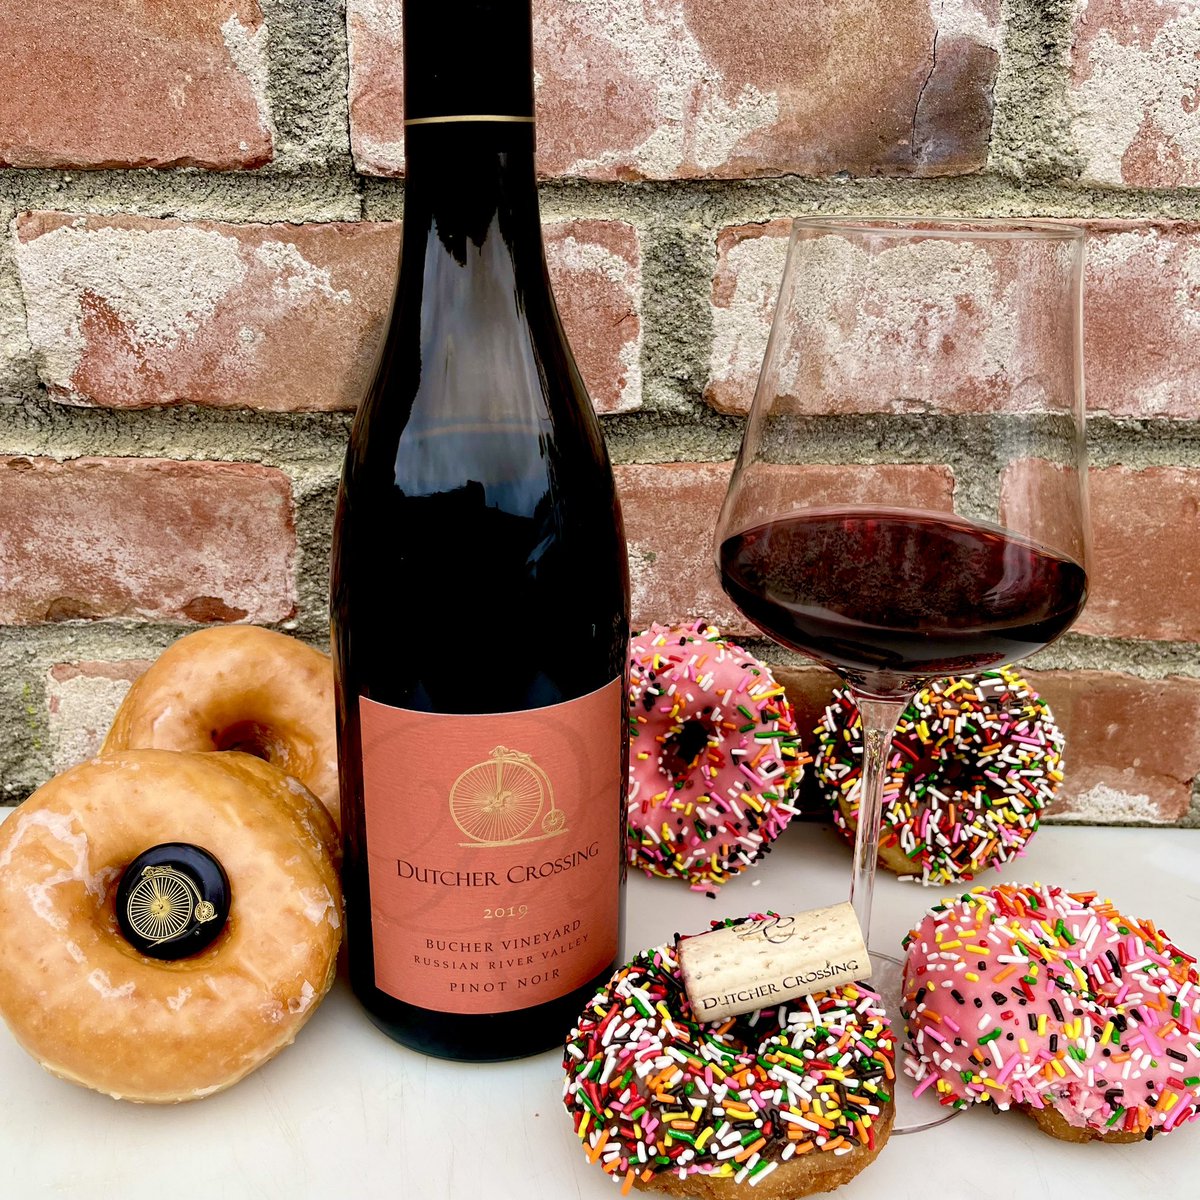 #MondayMotivation with donuts and this @DutcherCrossing pinot noir from RRV. There are aromas of sandalwood, orange peel and blueberry with flavors of Santa Rosa plum, clove and hints of toffee. Nicely done! @JAndrewFlorezII @boozychef @G12Rocco @AskRobY @katerina_brv